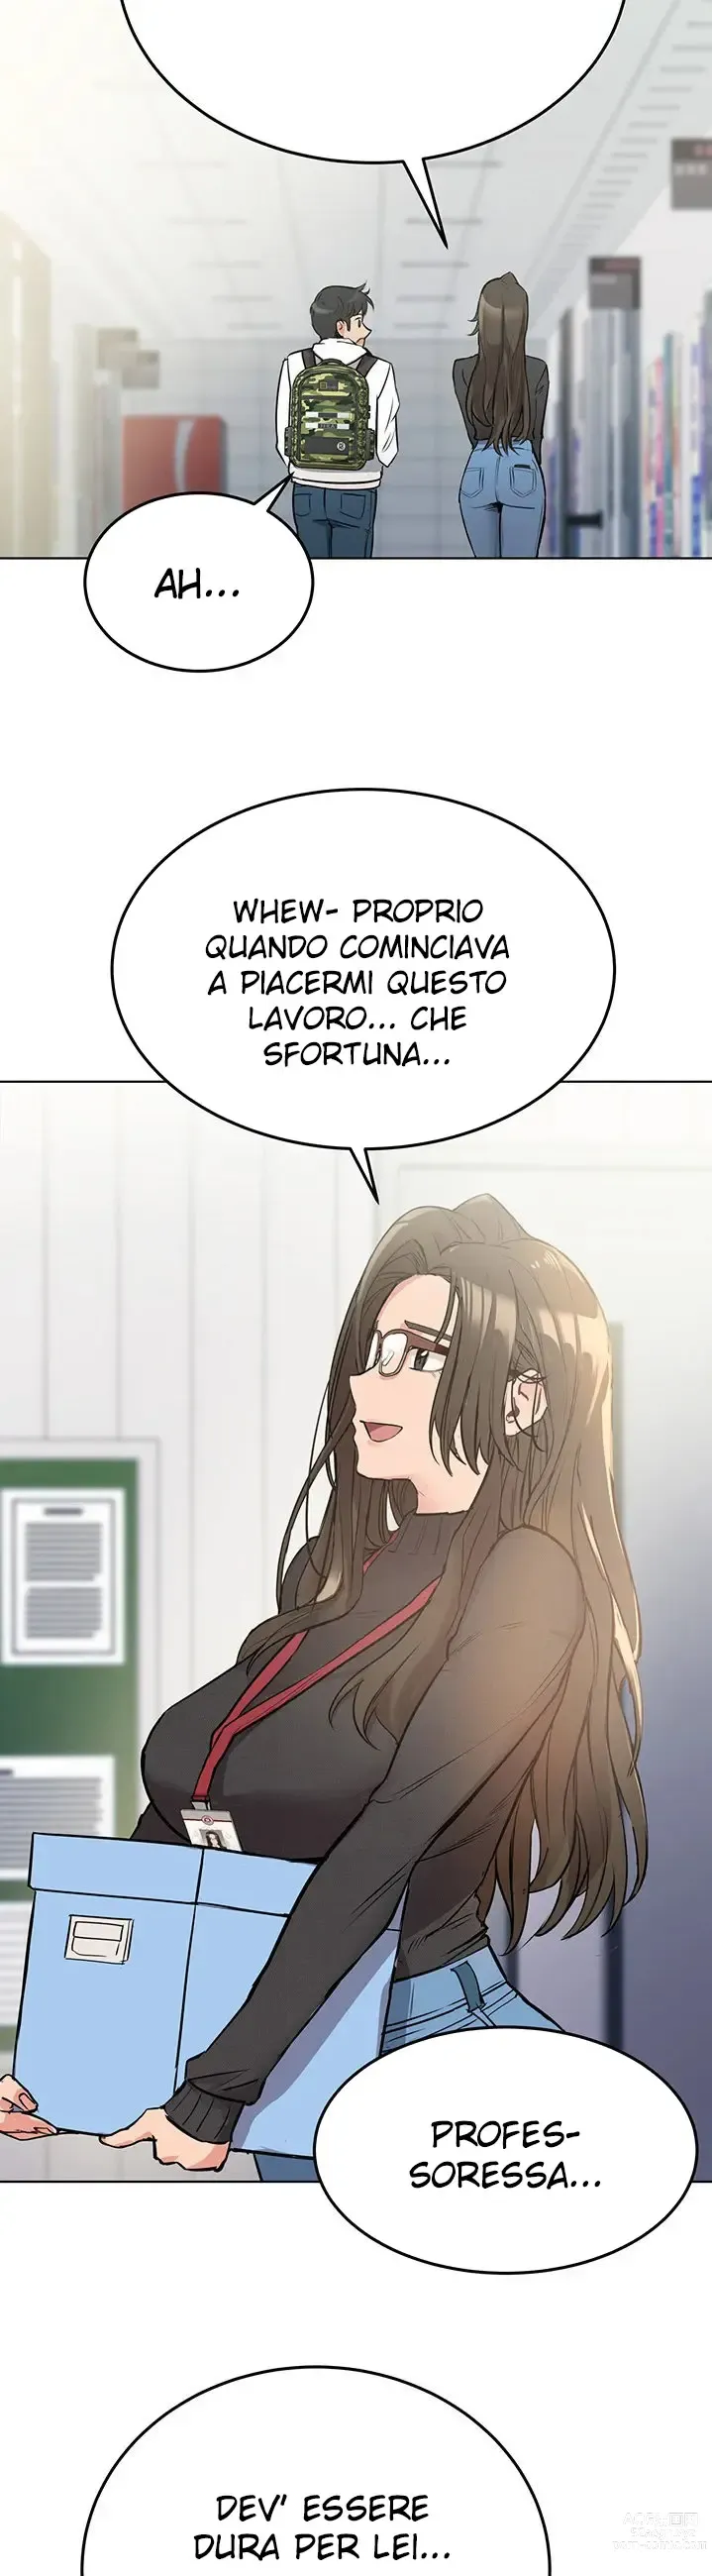 Page 43 of manga Keep It a Secret From Your Mother capitolo 02